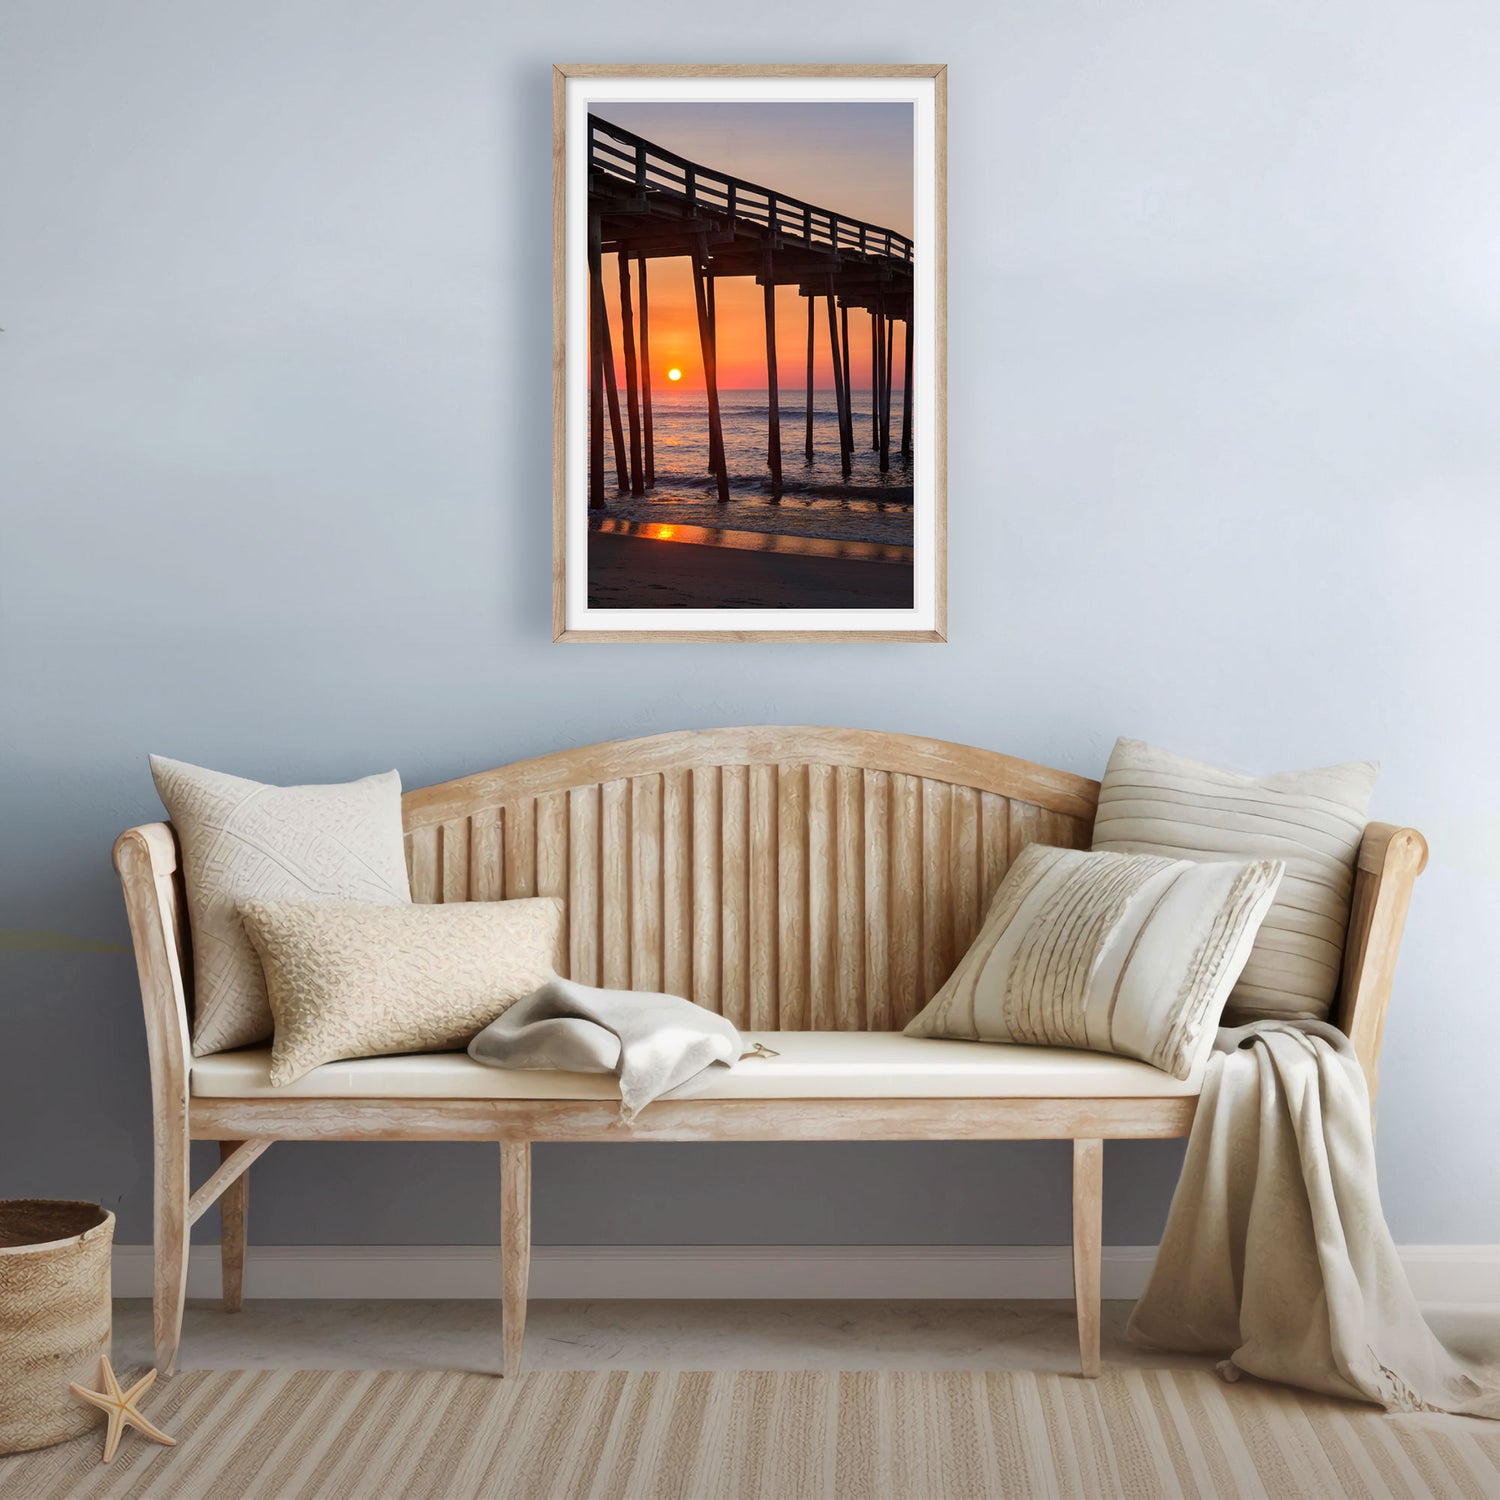 Outer Banks wall art featuring Avon Pier as the sun was rising